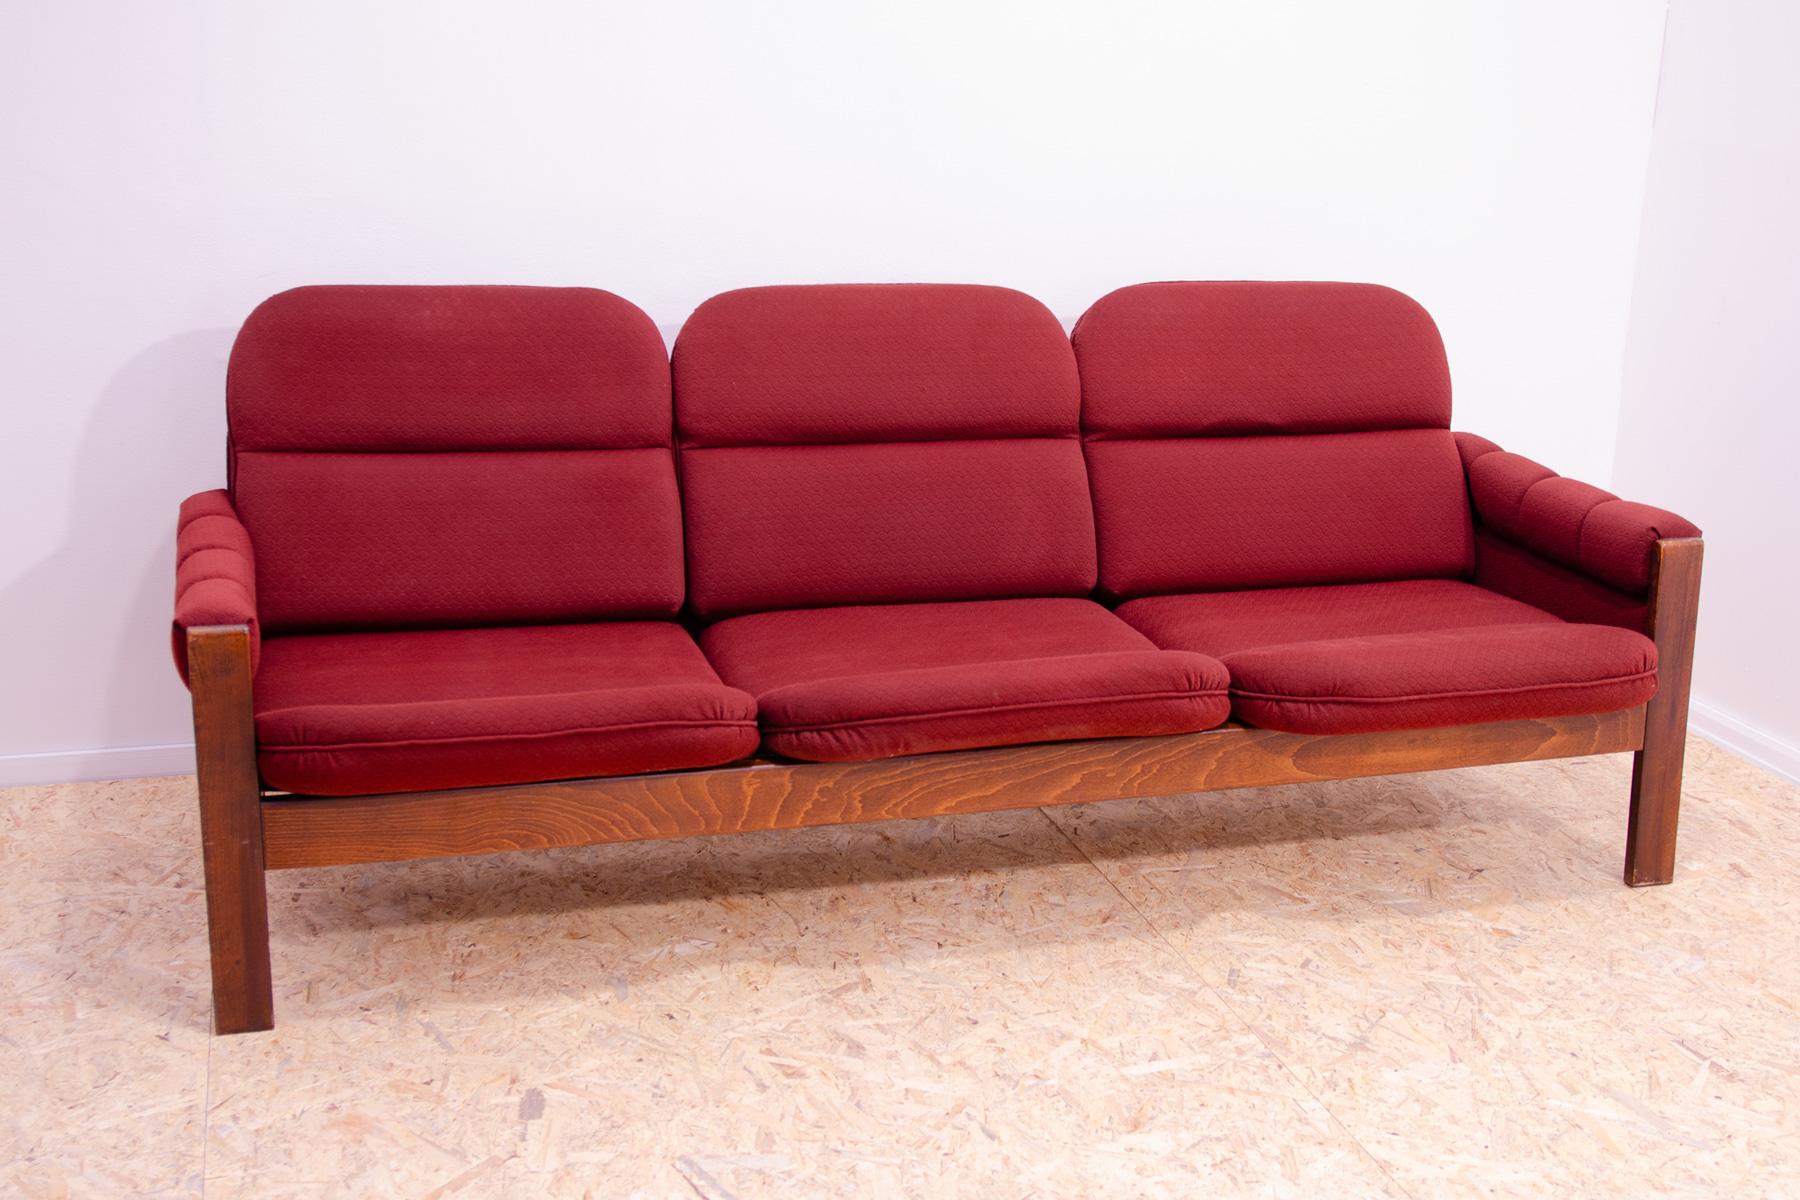 This lounge Scandinavian style three seater sofa was made in the 1970´. It´s upholstered with fabric. The structure is made of beech wood. All in very good Vintage condition, shows slight signs of age and use. The sofa has been cleaned.

Dimensions